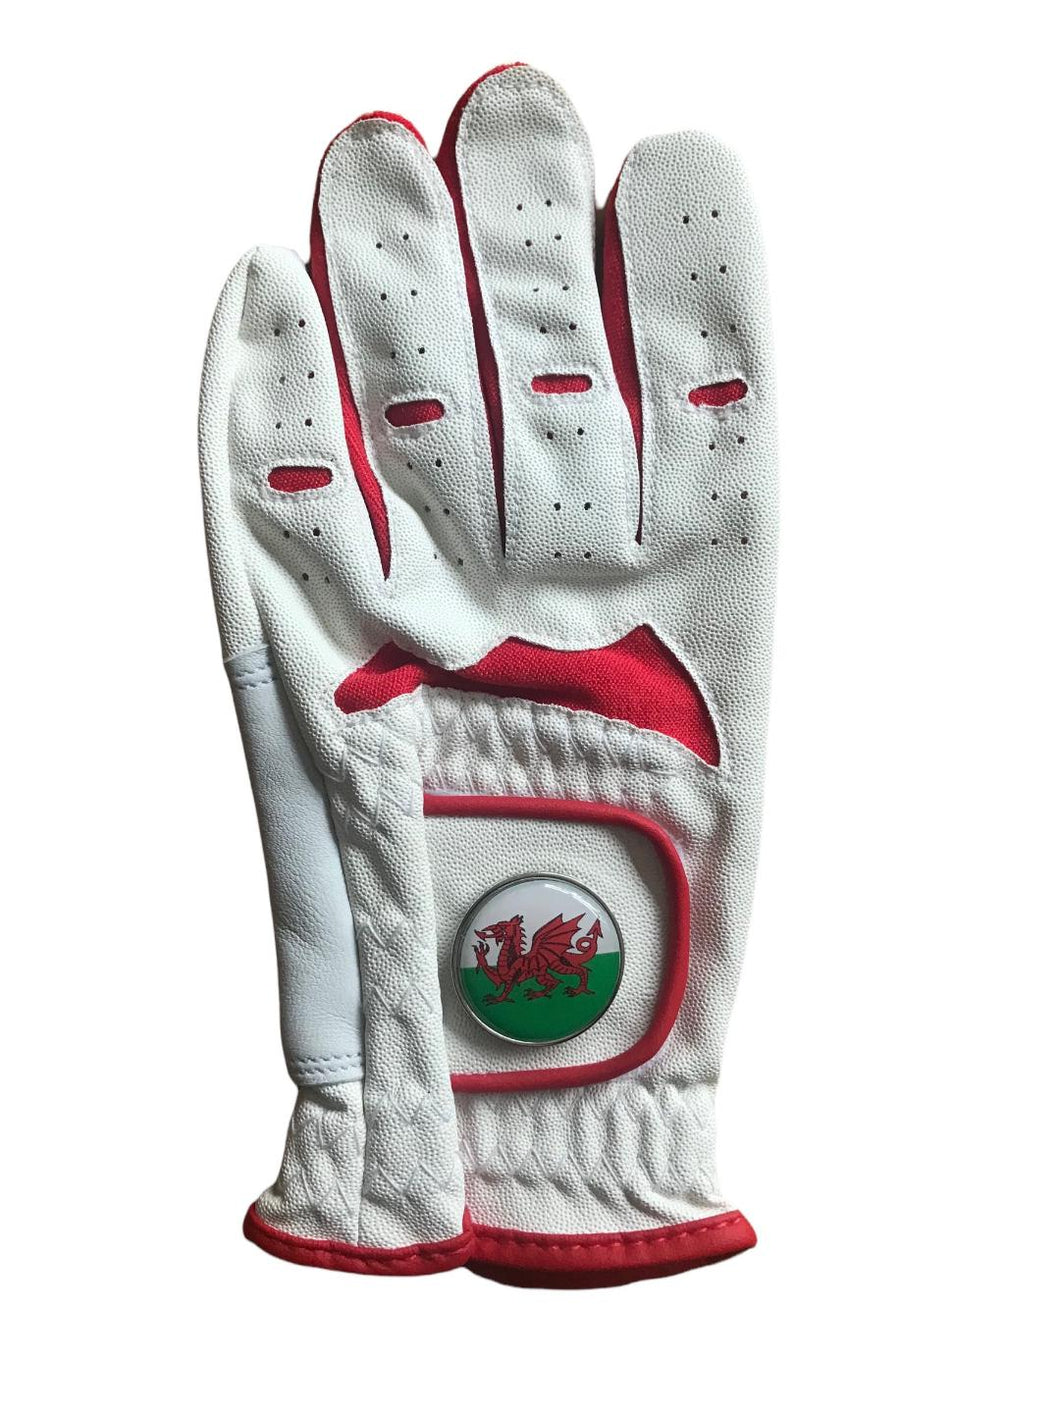 NEW Junior Red / White All Weather Golf Glove. Wales Ball Marker. Small, Medium or Large.